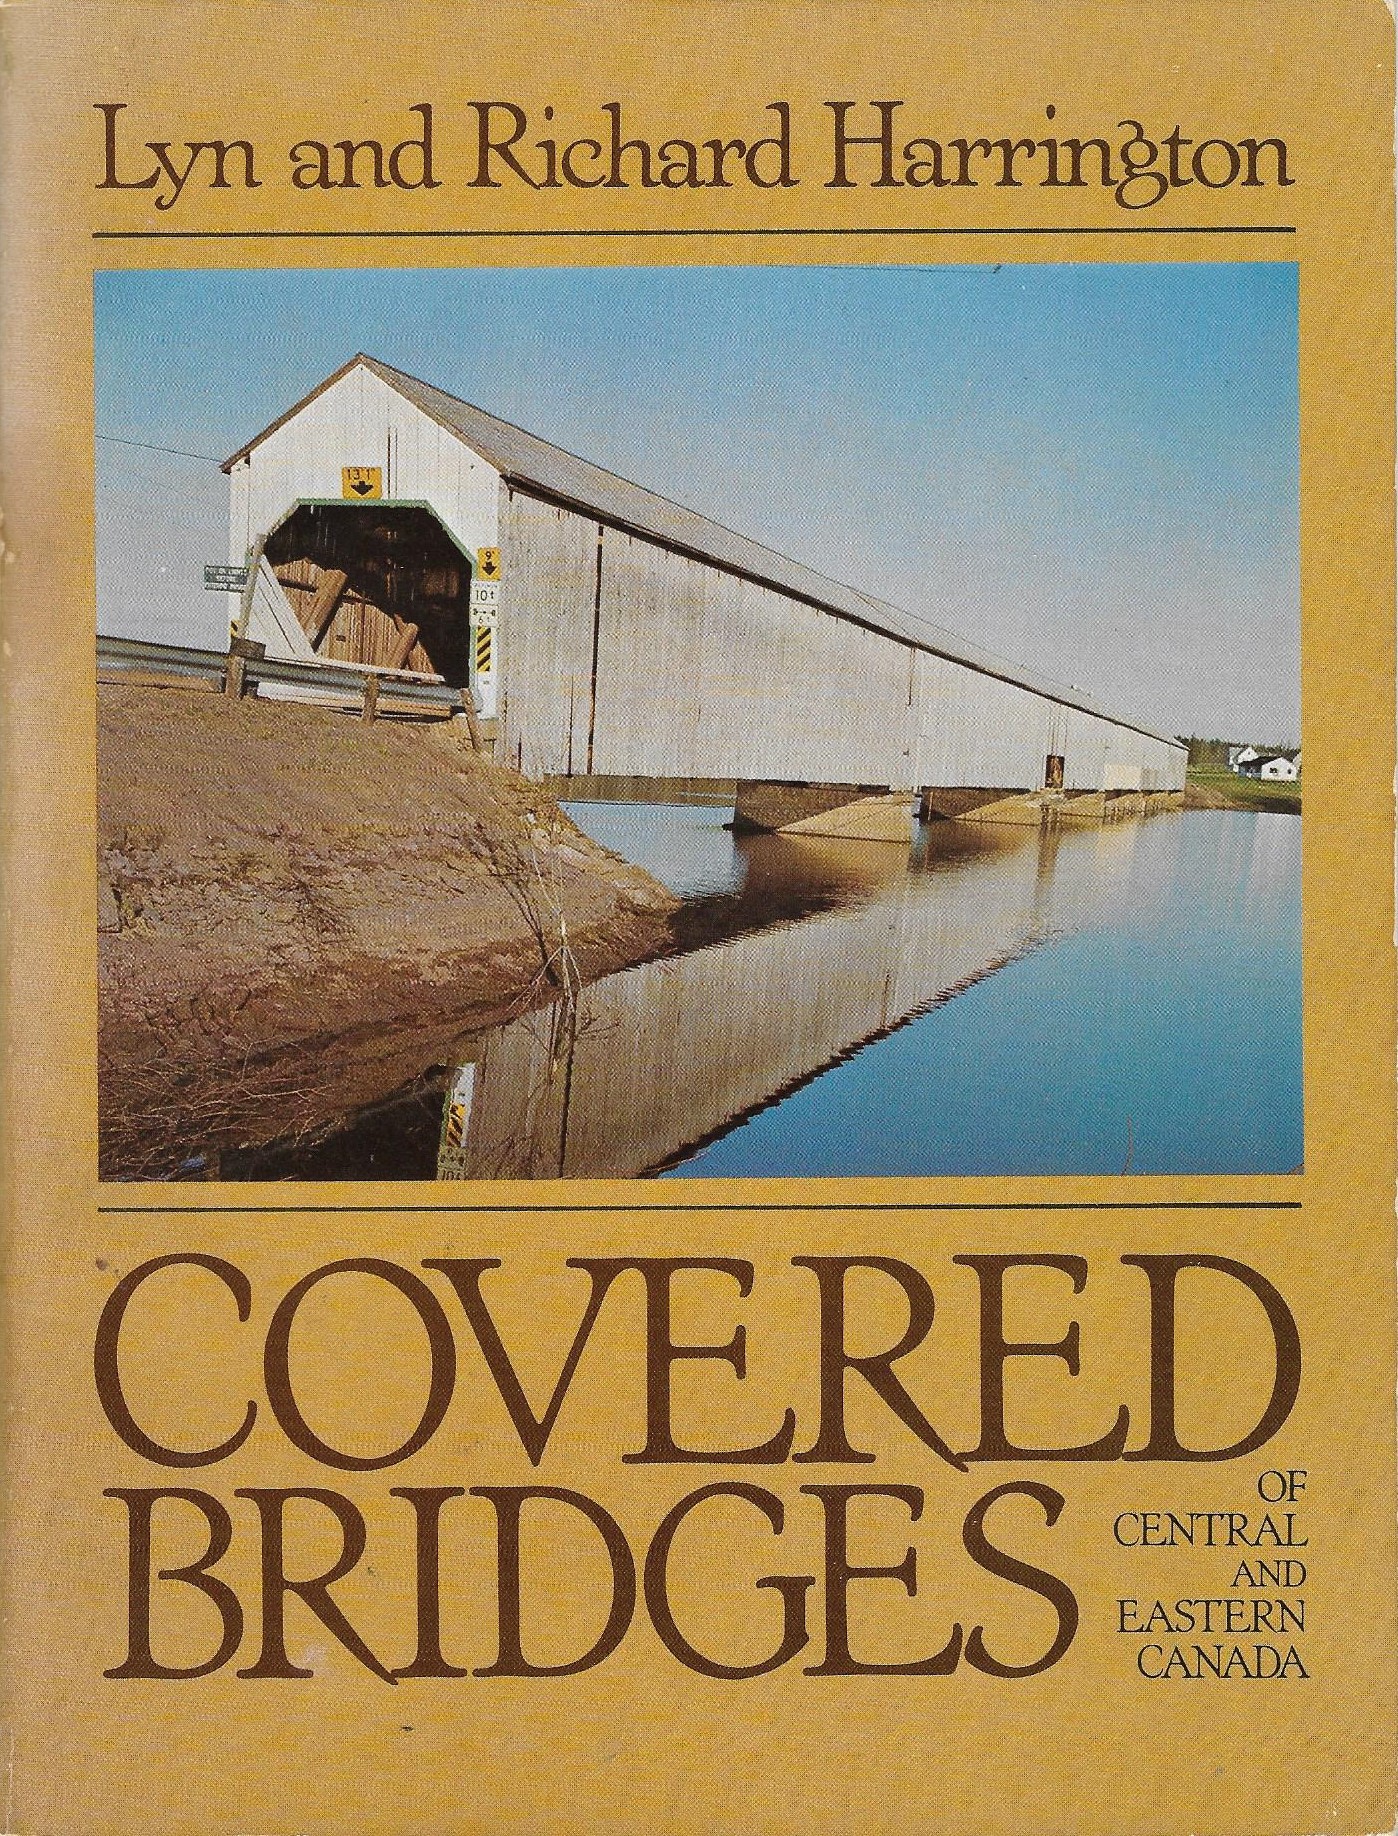 On My Bookshelf Covered Bridges Of Central And Eastern Canada By